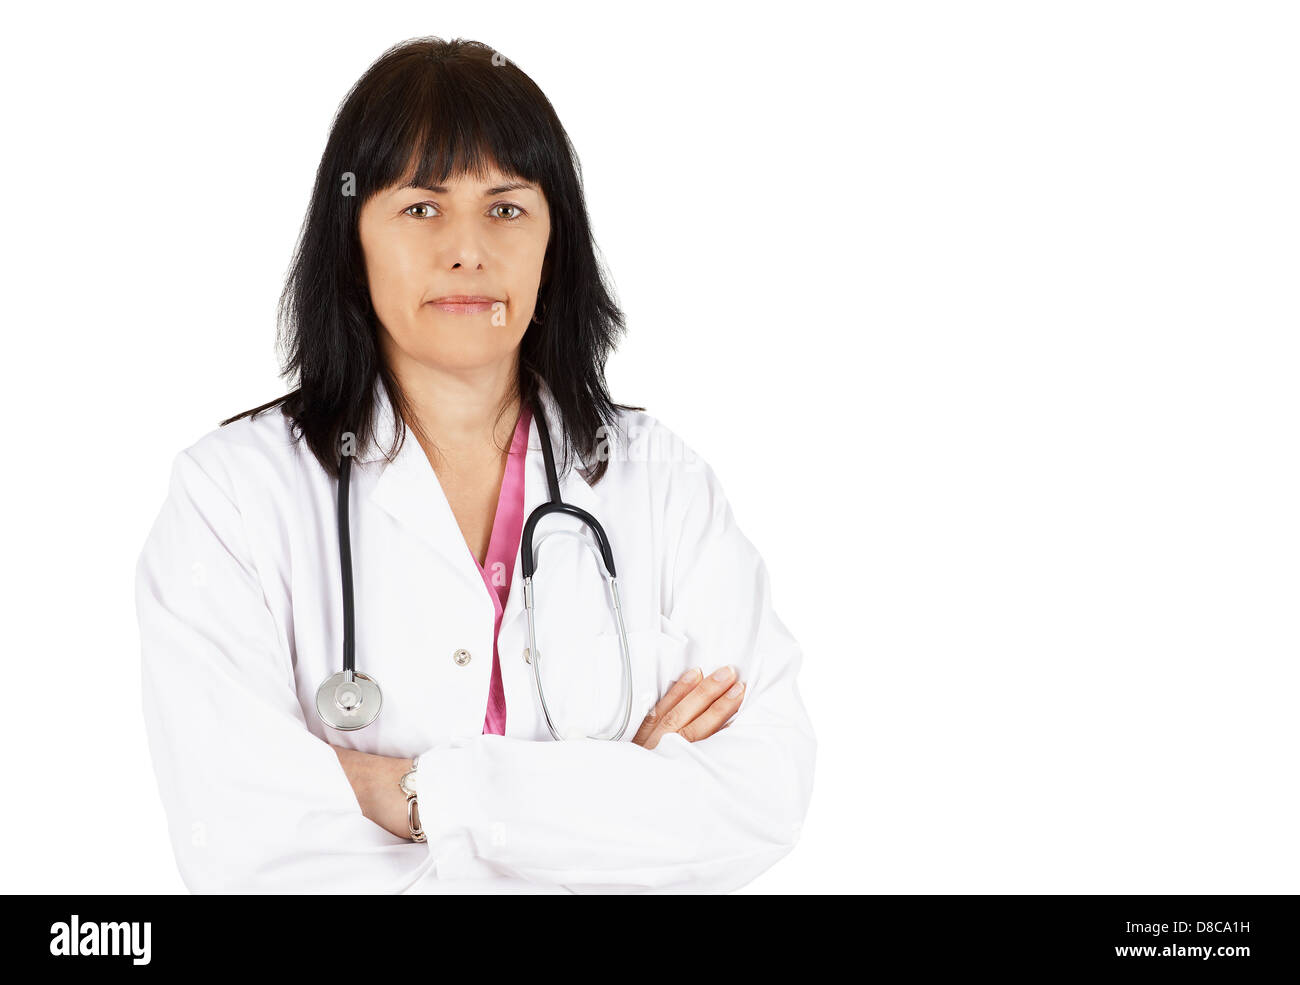 Friendly woman doctor looking at camera on white Stock Photo